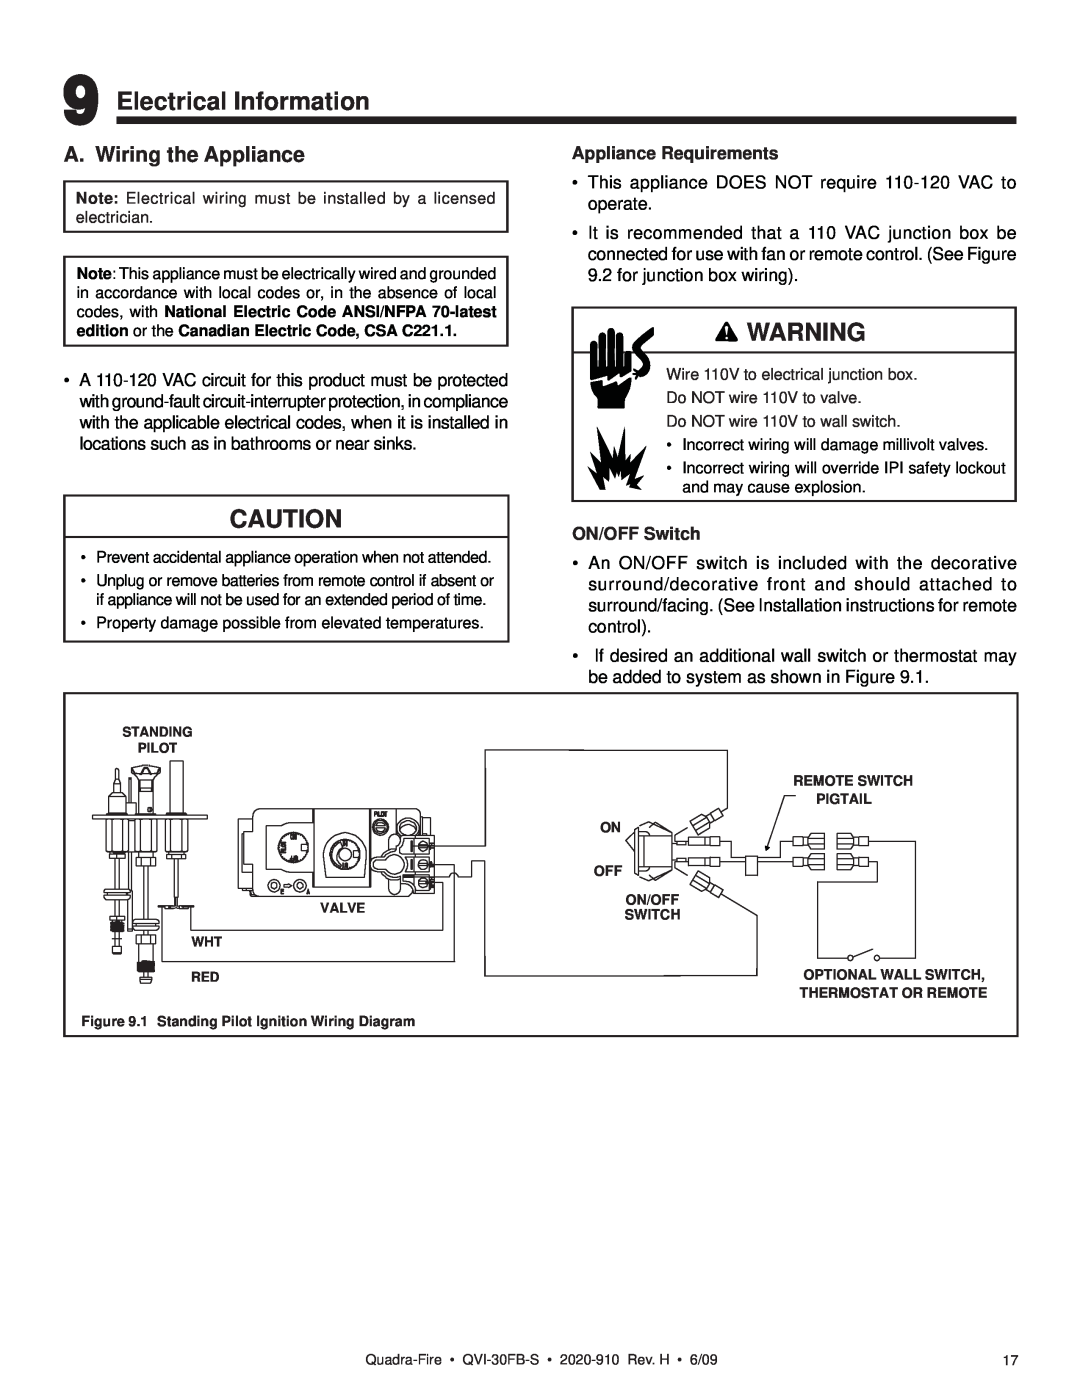 Quadra-Fire QVI-30FB-S owner manual Electrical Information, A. Wiring the Appliance 